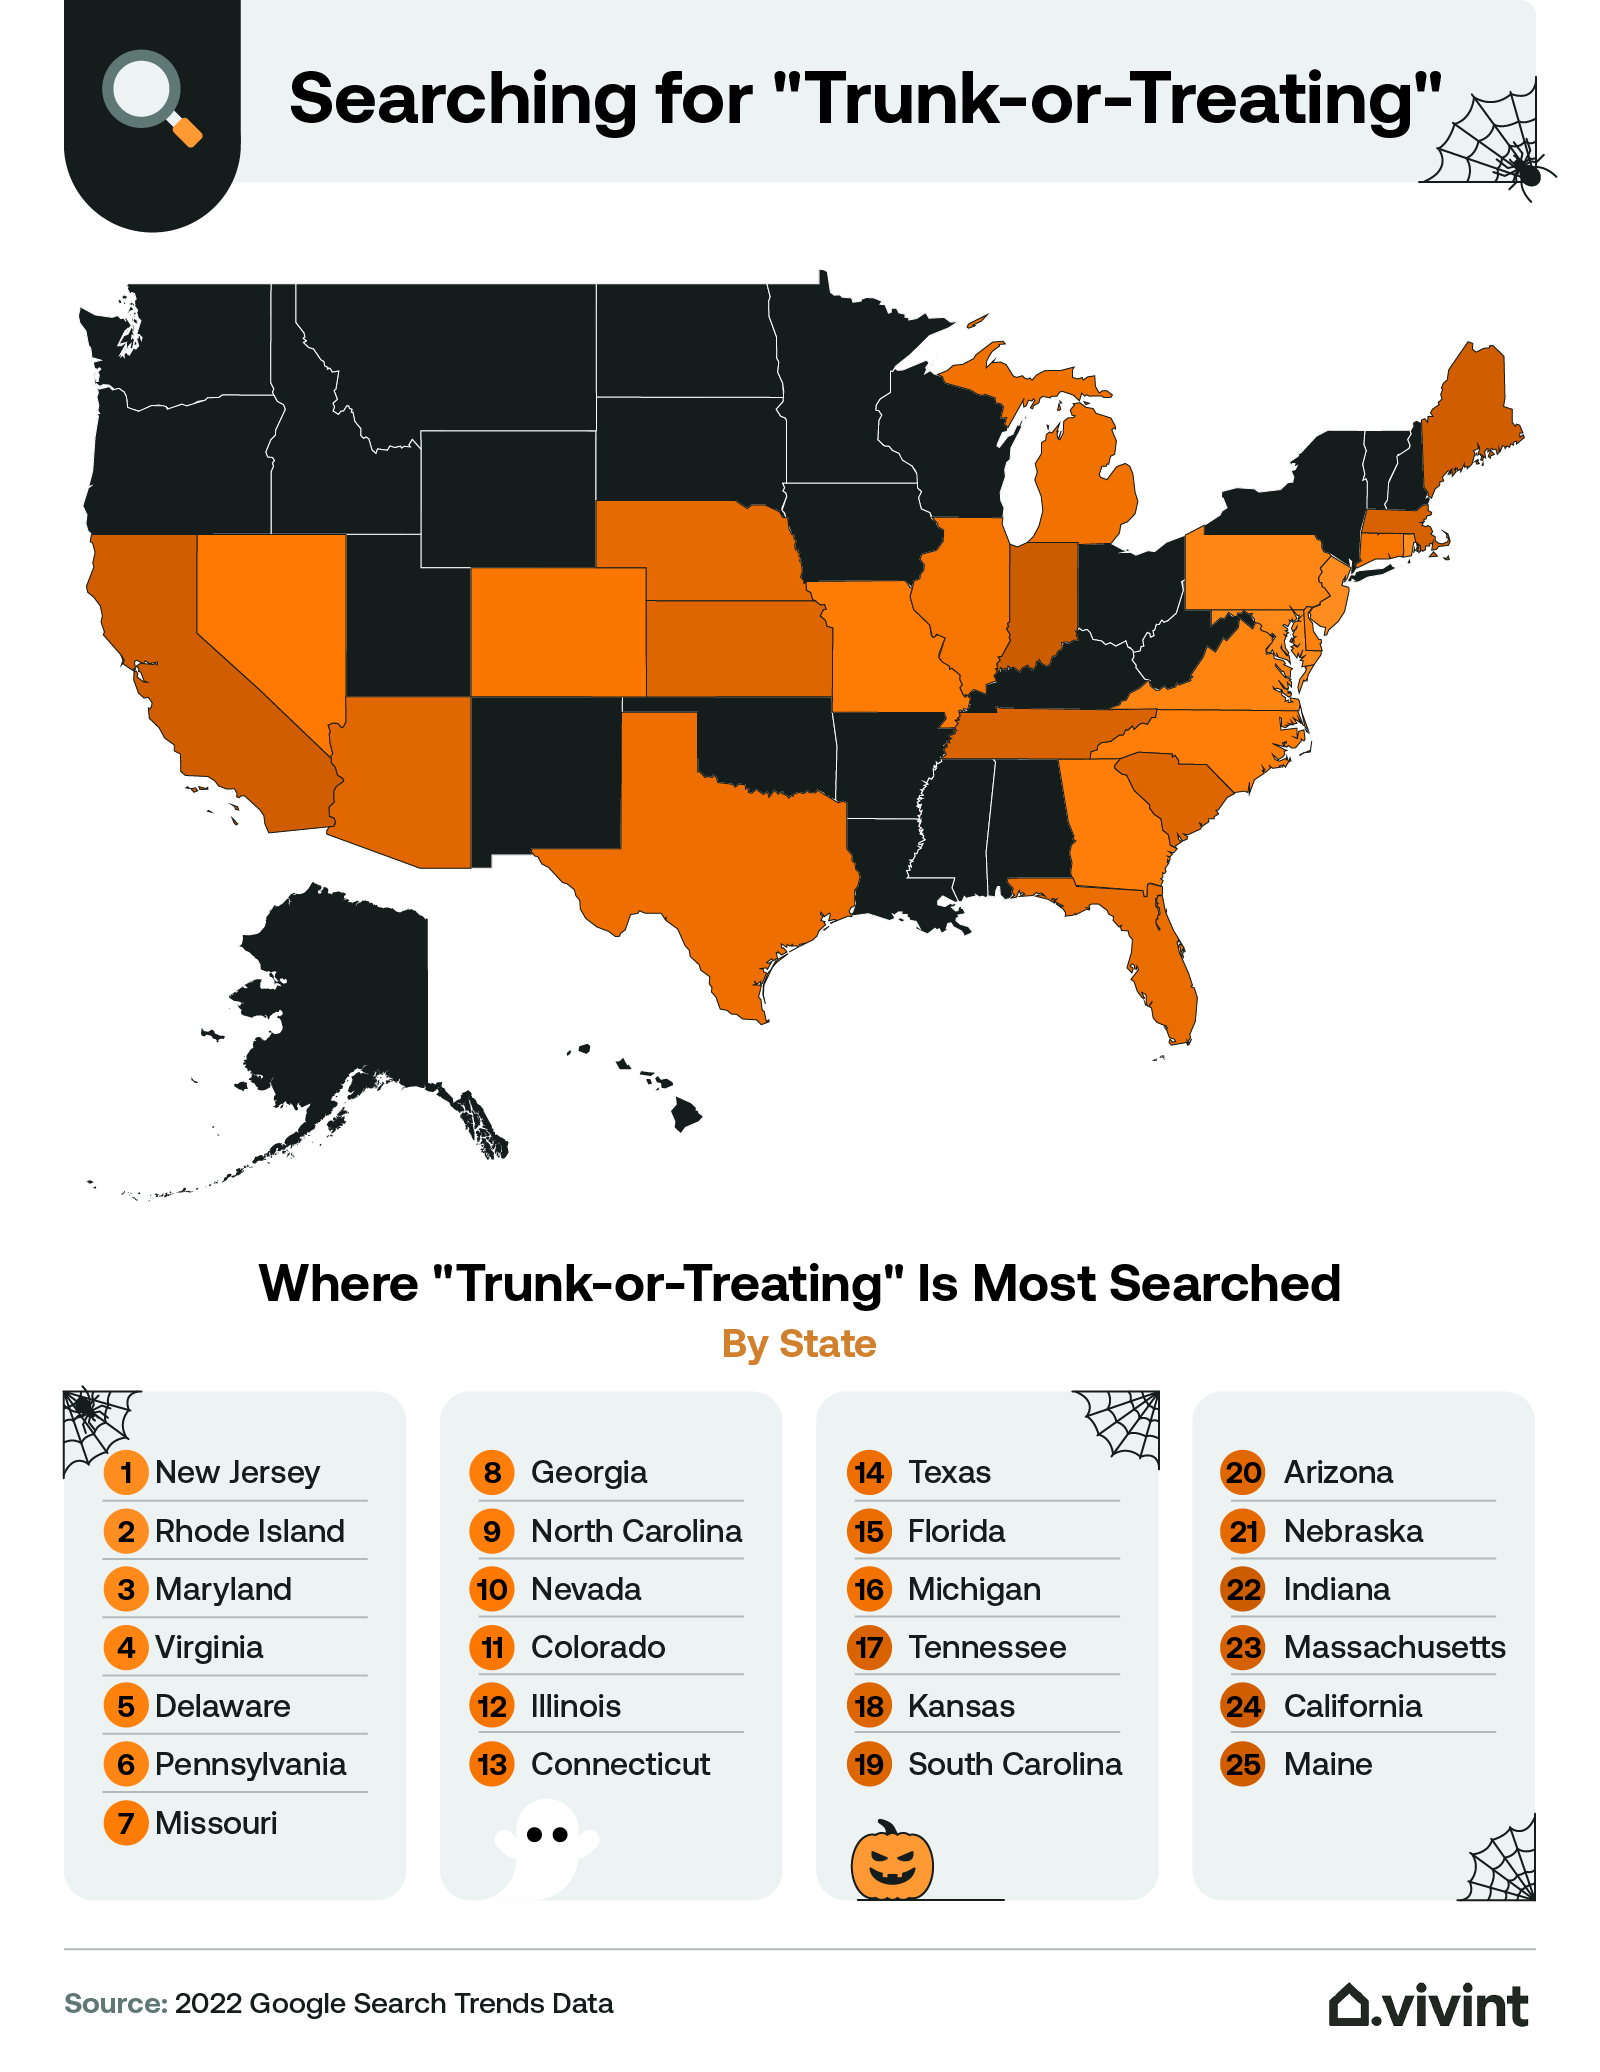 Information about where in the United States trunk-or-treating is most popular.